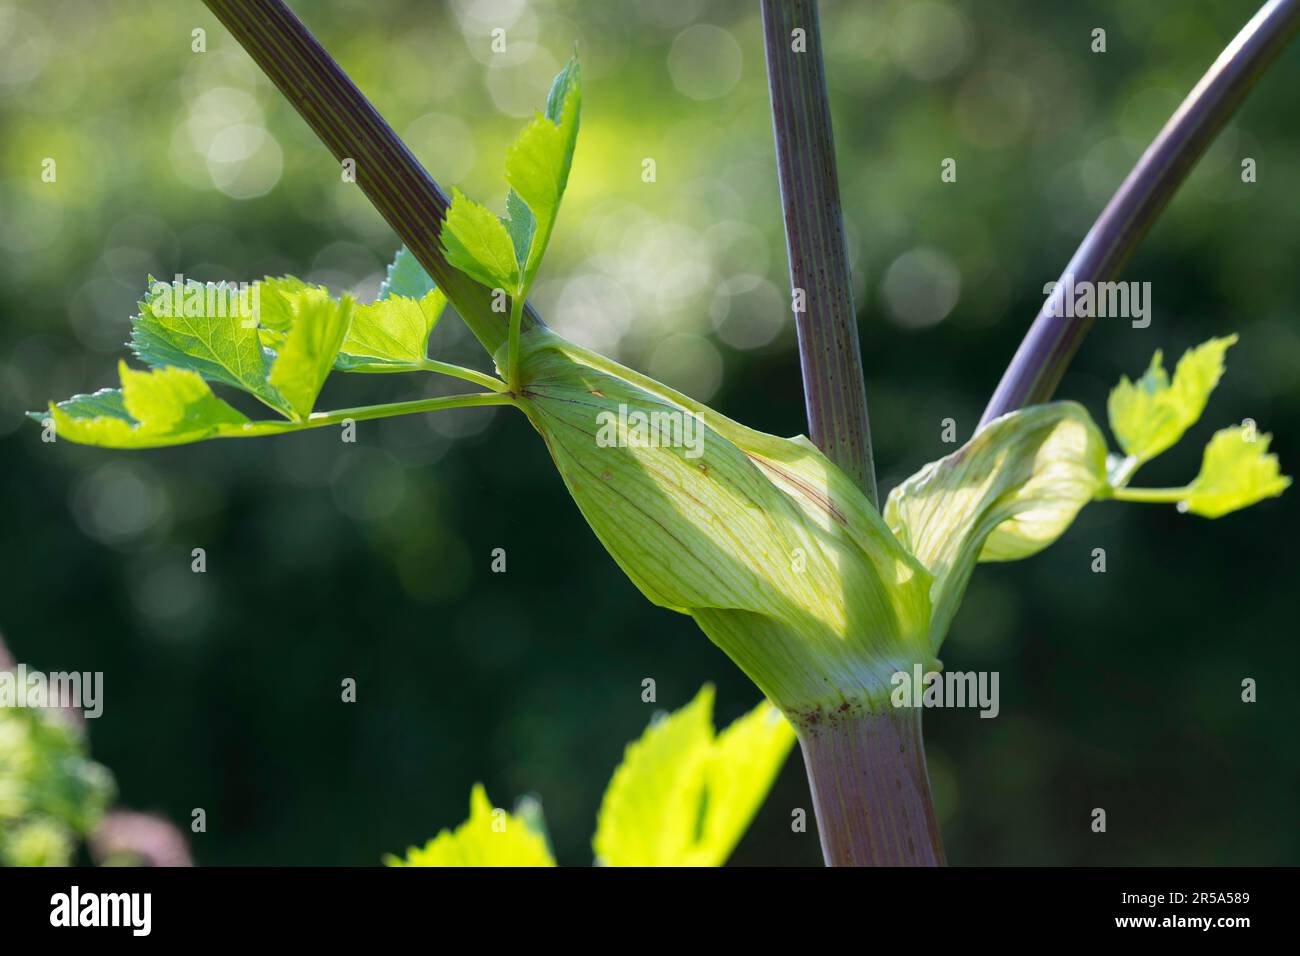 Garden angelica (Angelica archangelica), leaf with sheath, Germany Stock Photo